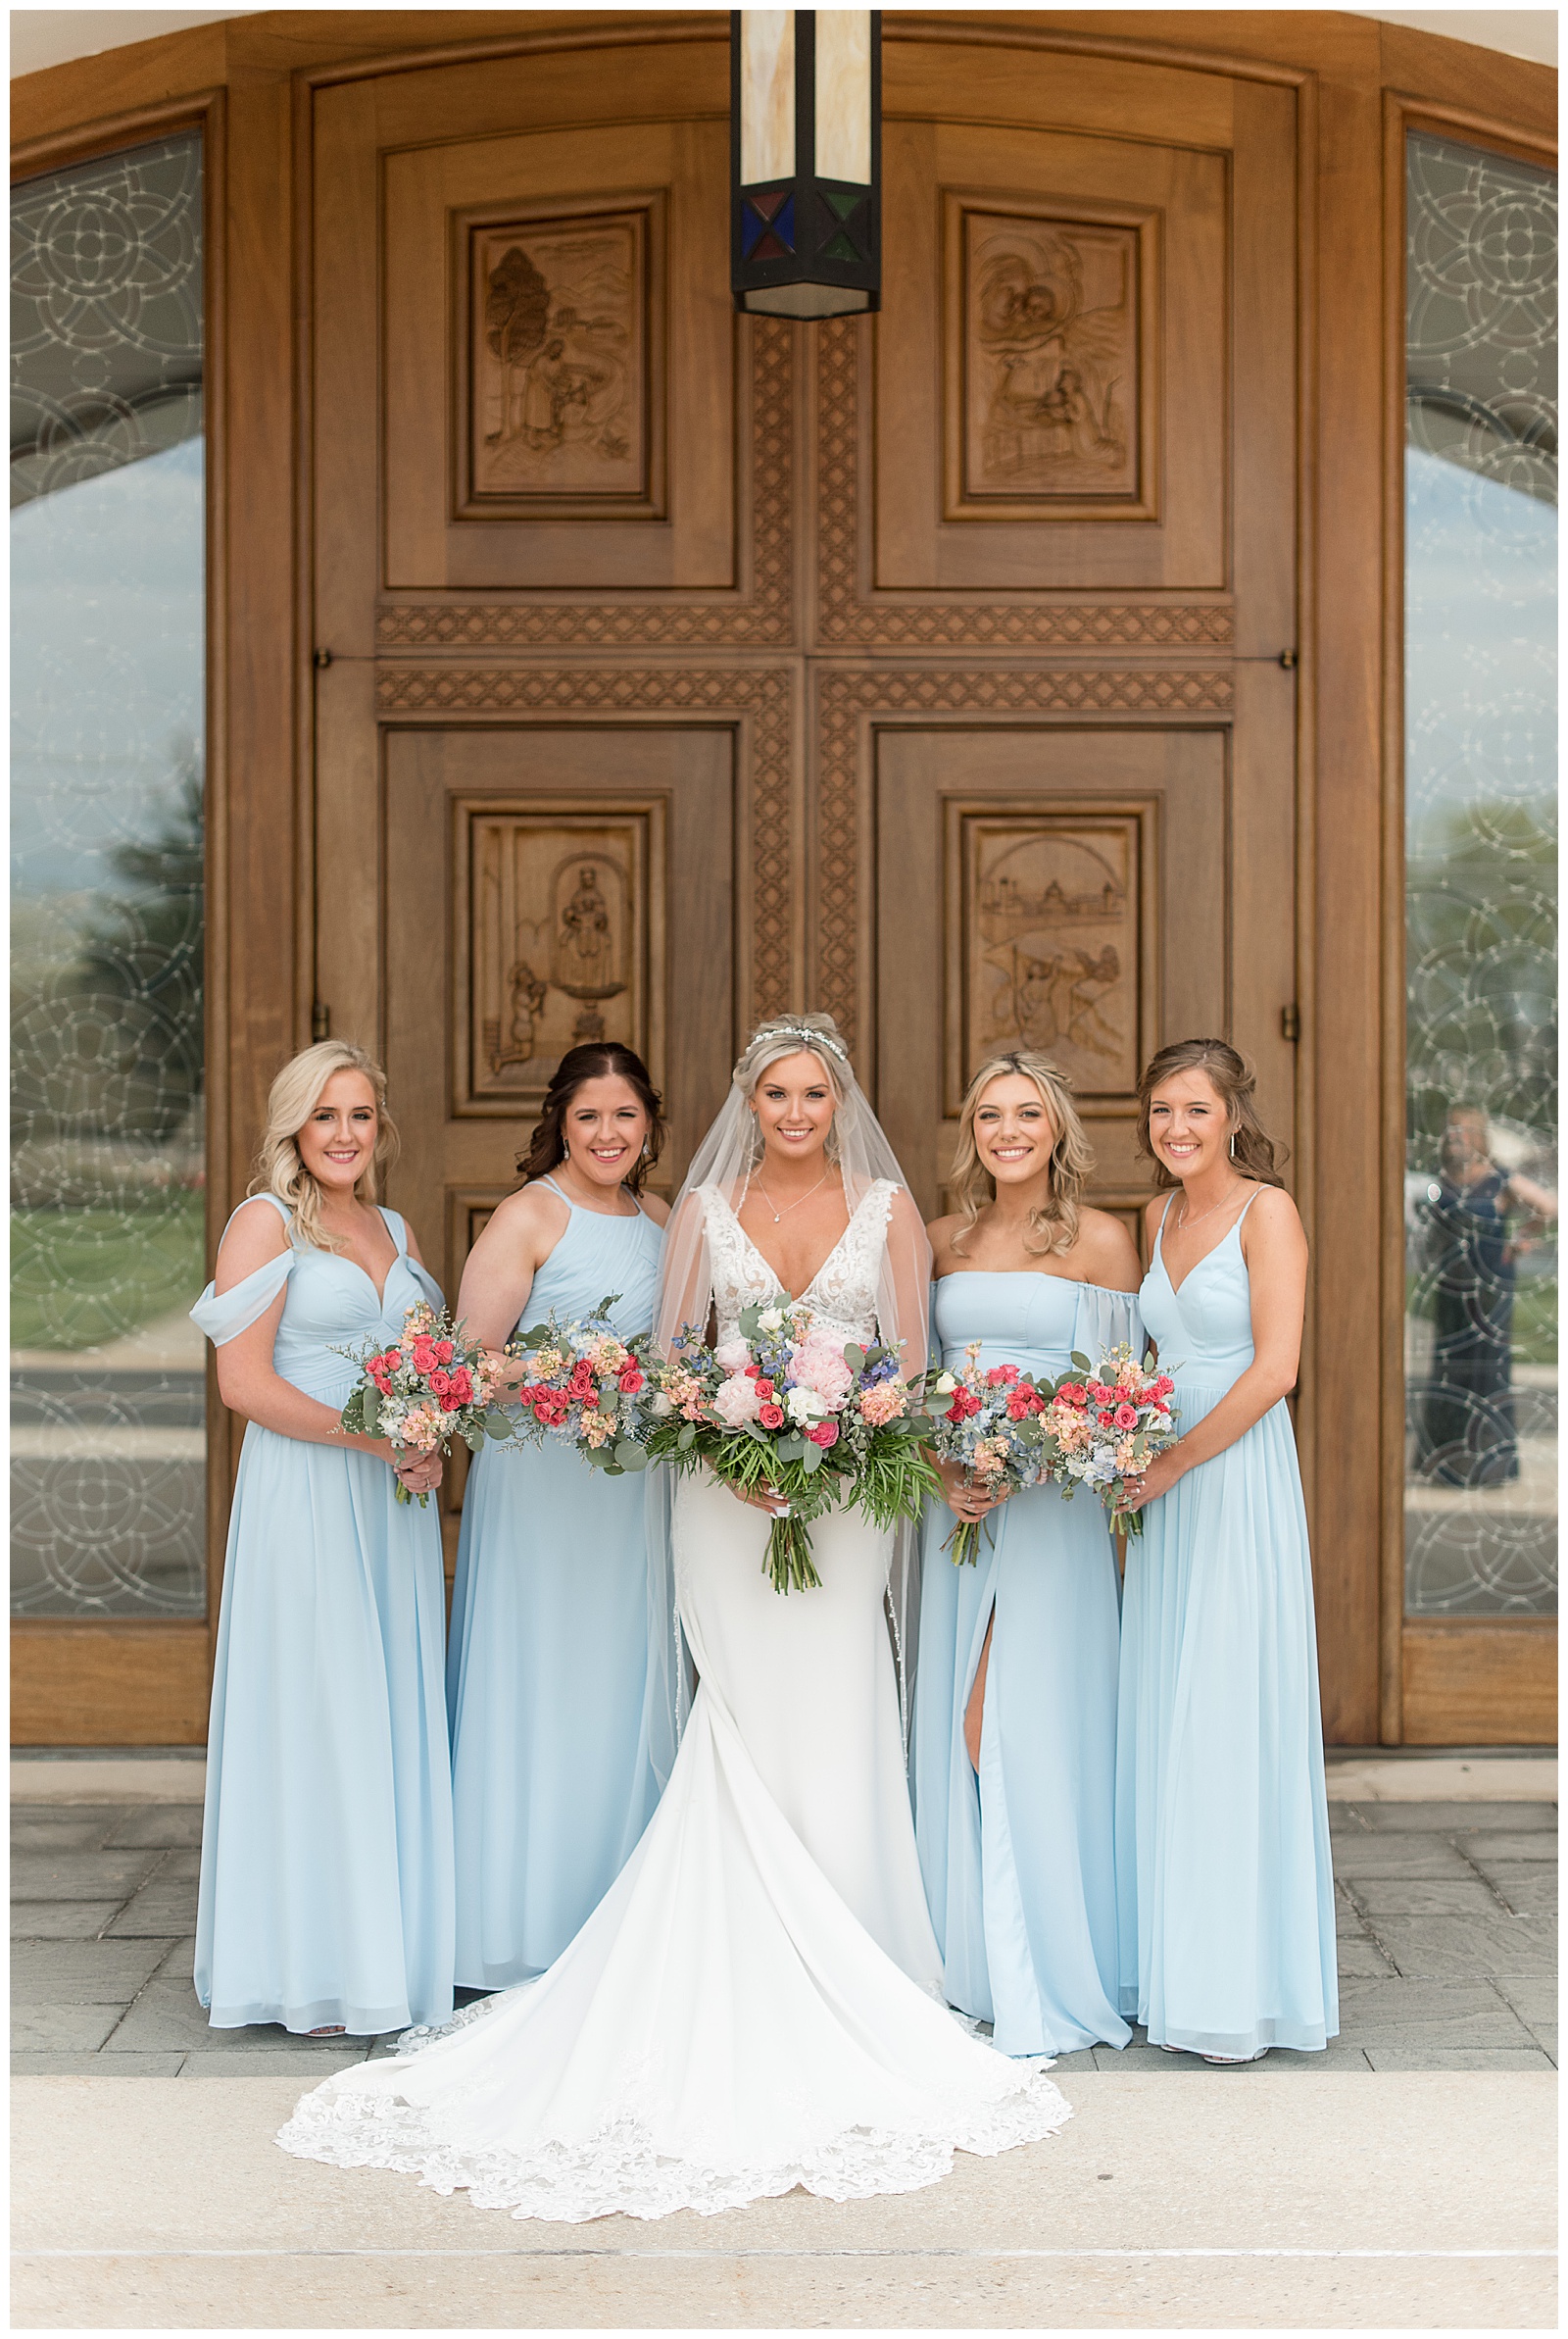 bride surrounded by four bridesmaids wearing light blue dresses and all smiling and looking at camera while holding bouquets